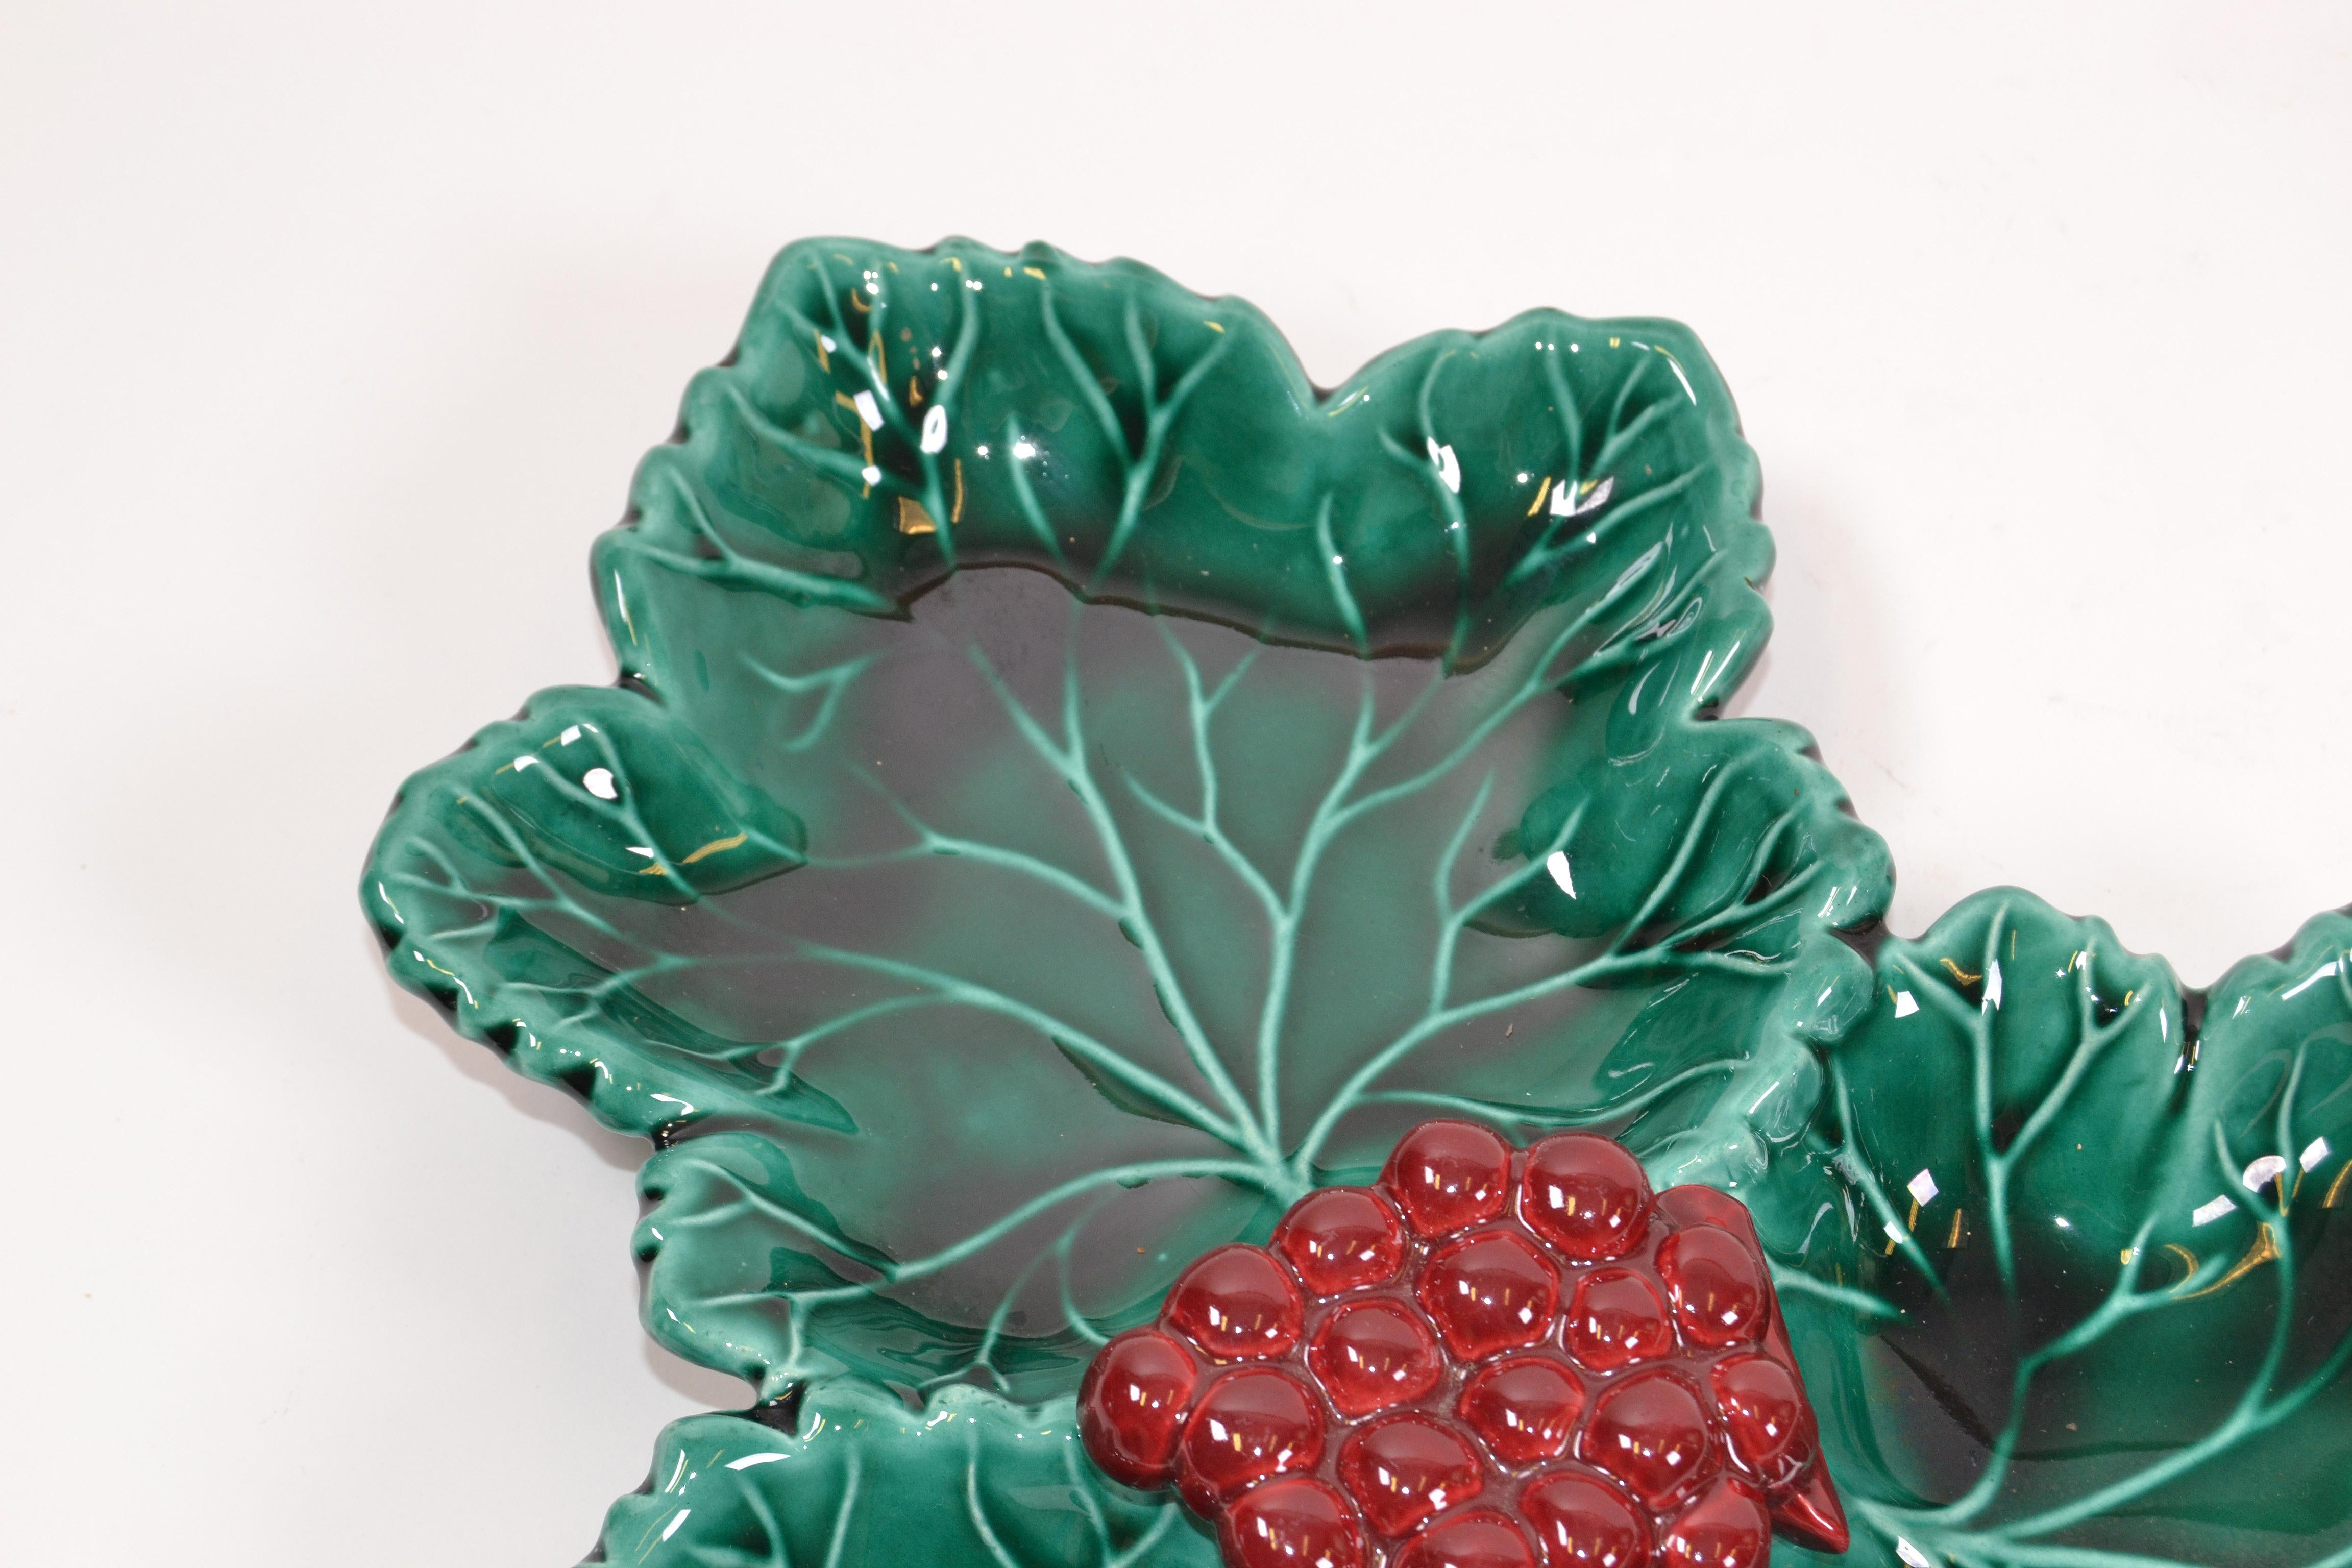 Vallauris French Glazed Grapes & Vine Leaves Ceramic Serving Plate Green and Red In Good Condition For Sale In Miami, FL